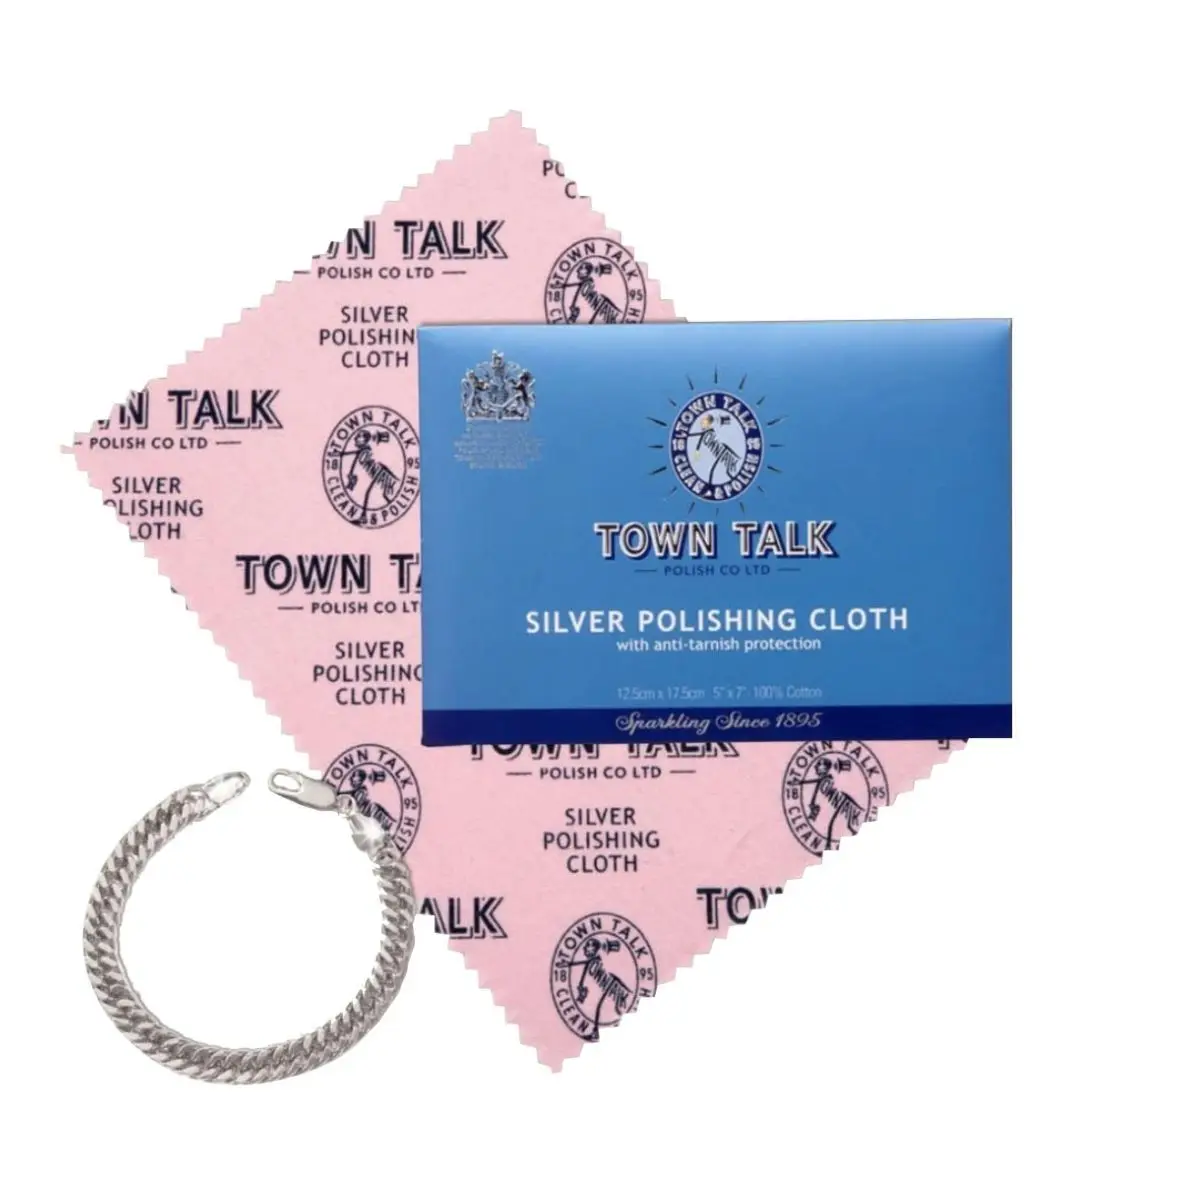 3PCS England Towntalk Silver Polishing Cloth Jewelry Anti-Tarnish Cleaning  Watches Natural Cotton Fiber 12.5*17.5cm 5*7inch